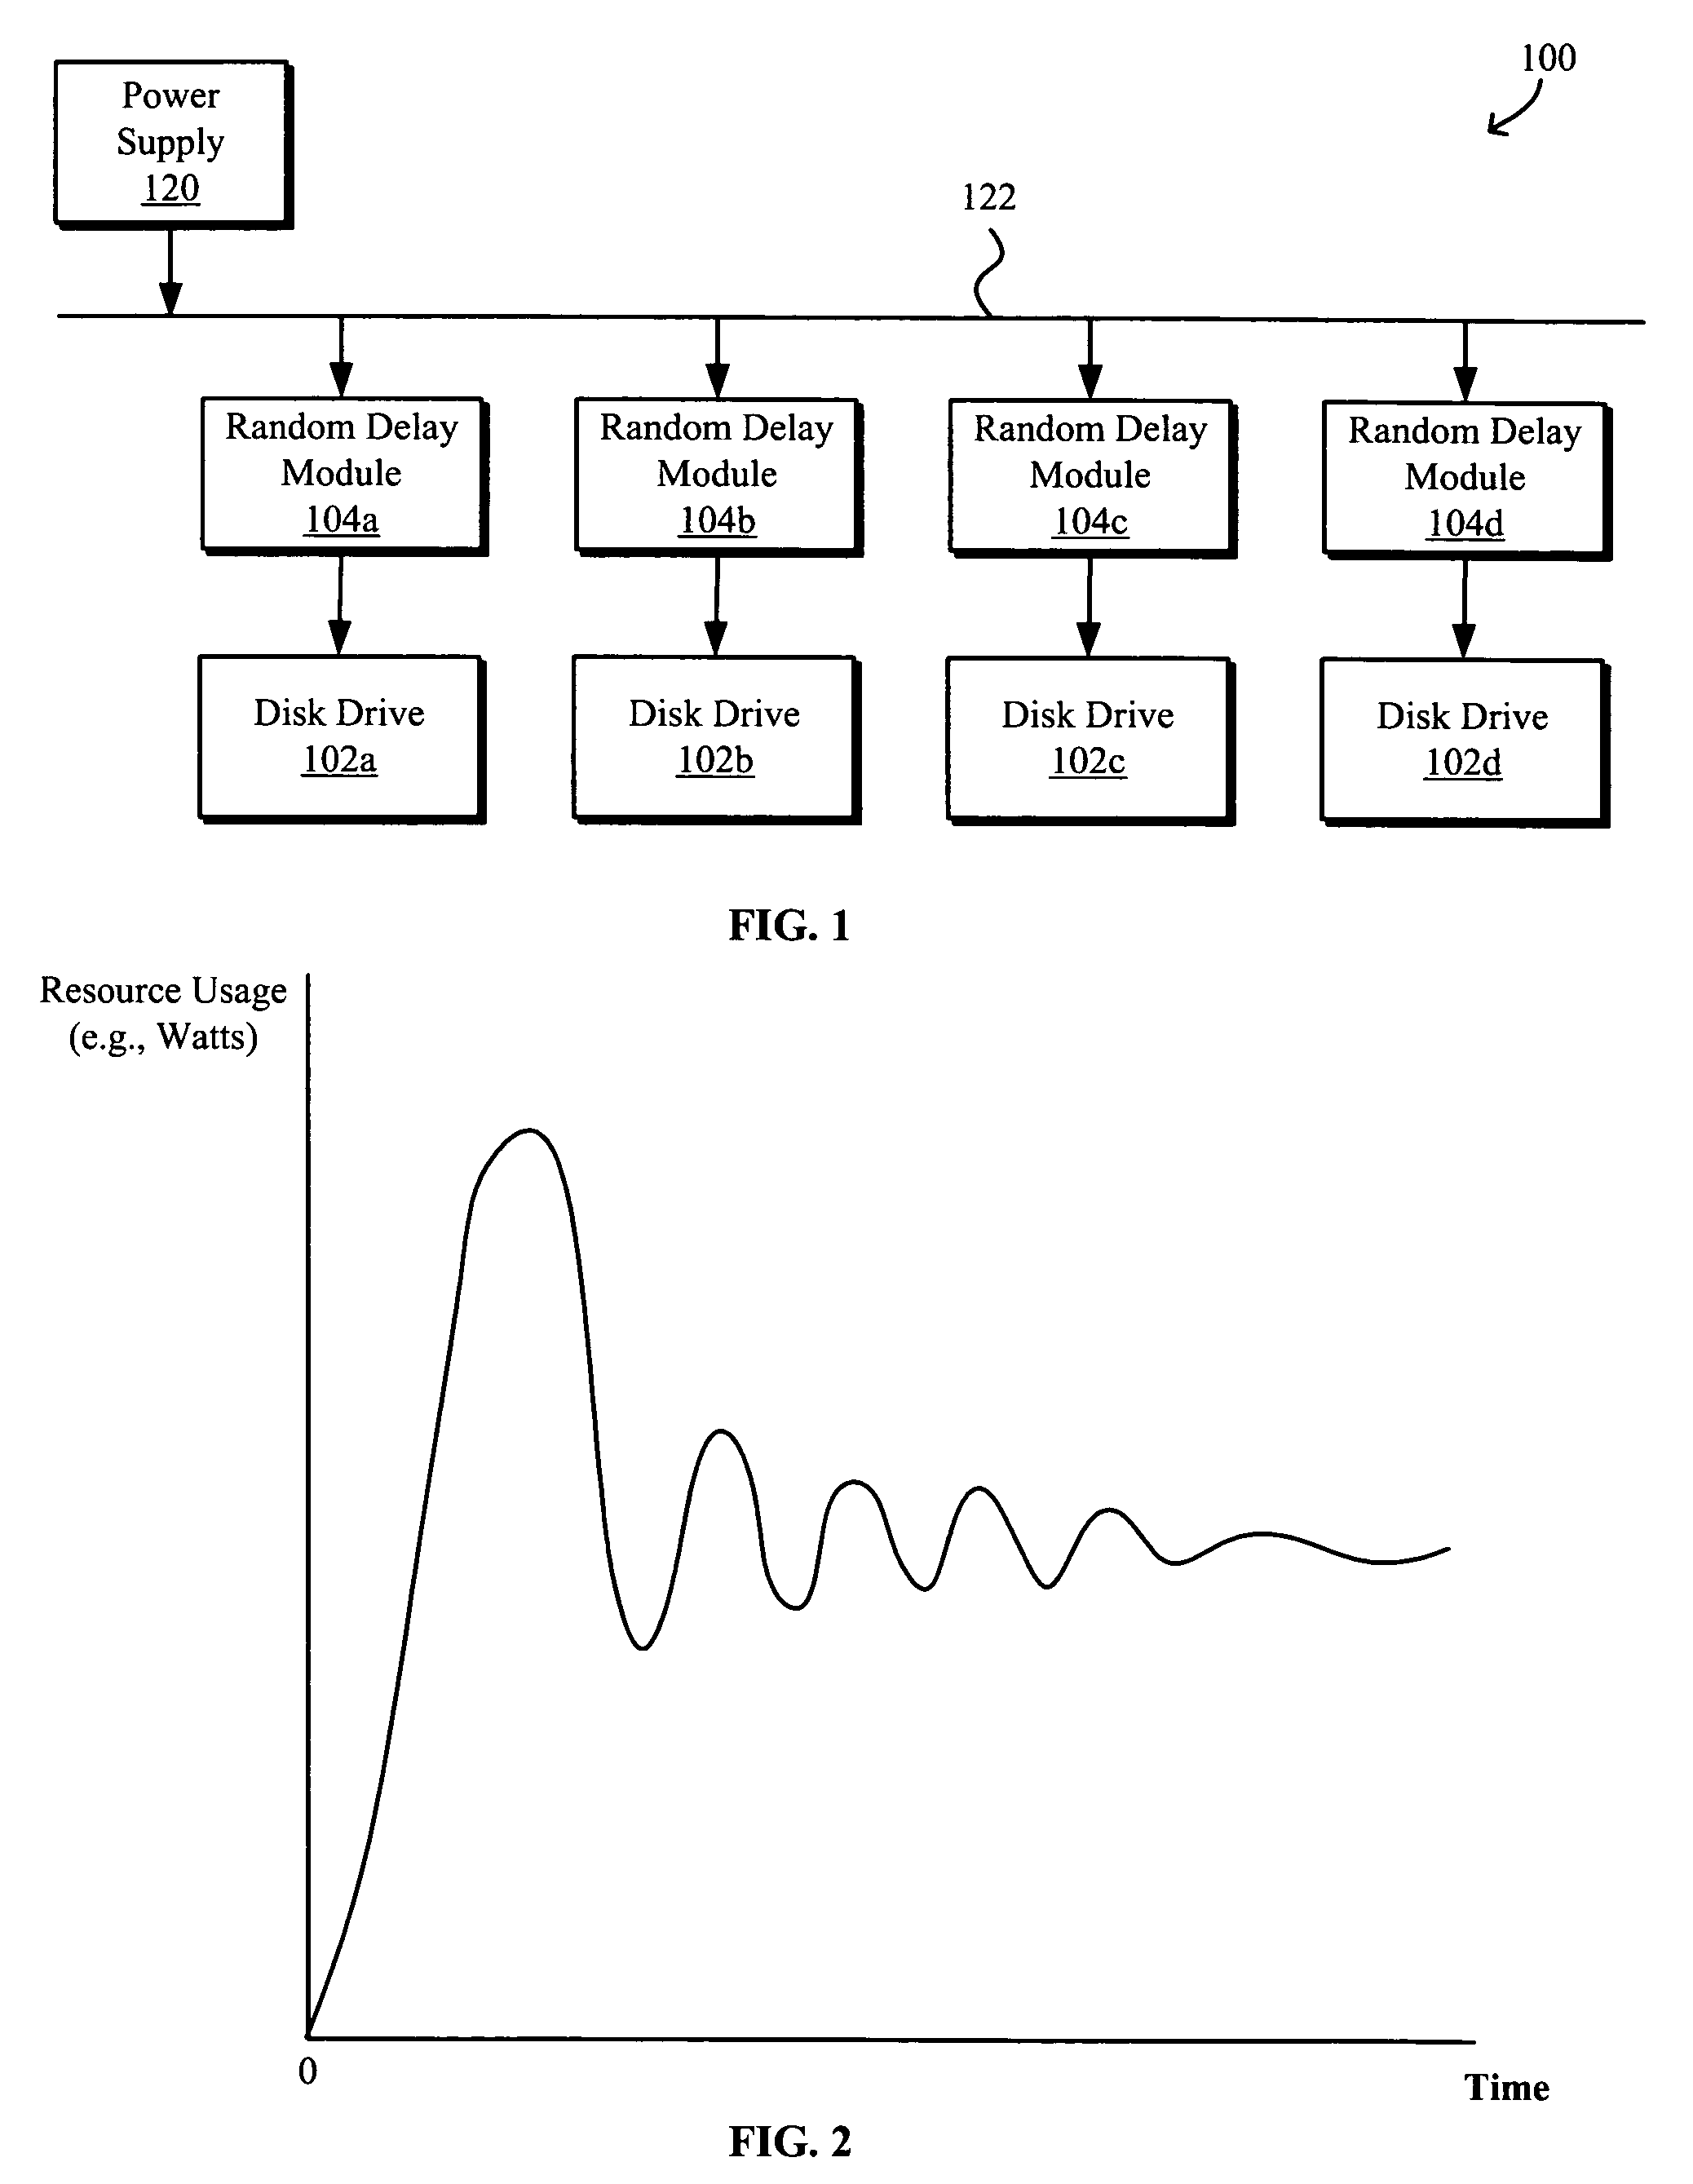 Systems and methods for delay in startup of multiple components